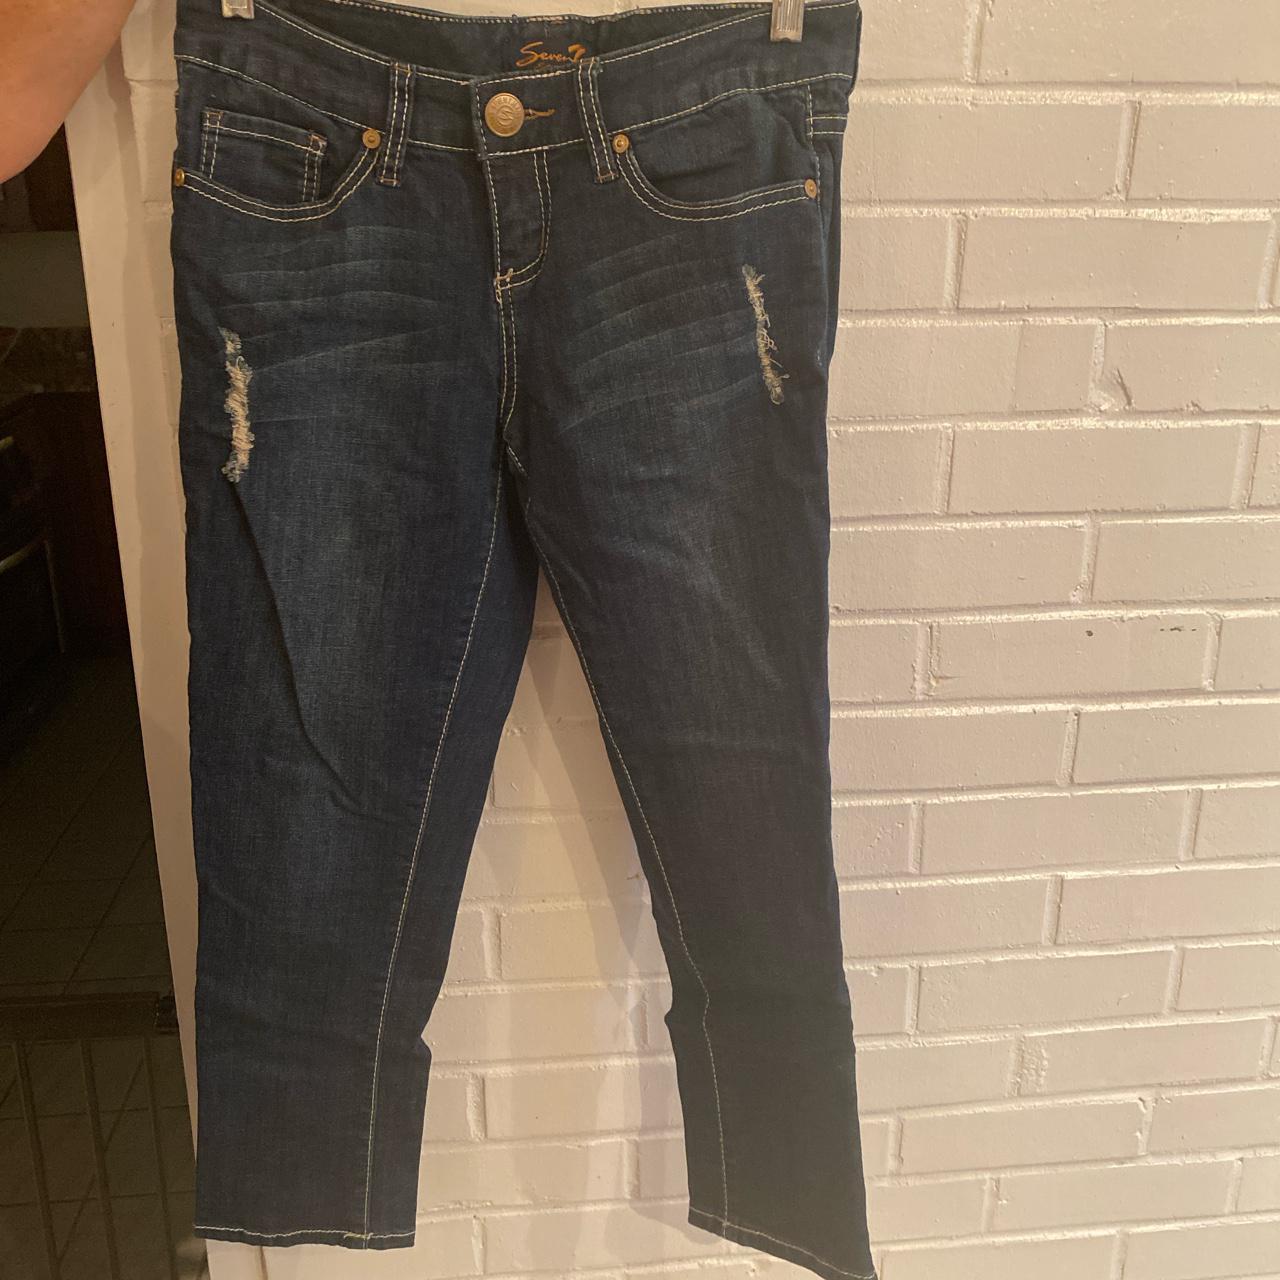 Product Image 2 - Seven7 jeans. Size 4 

Message